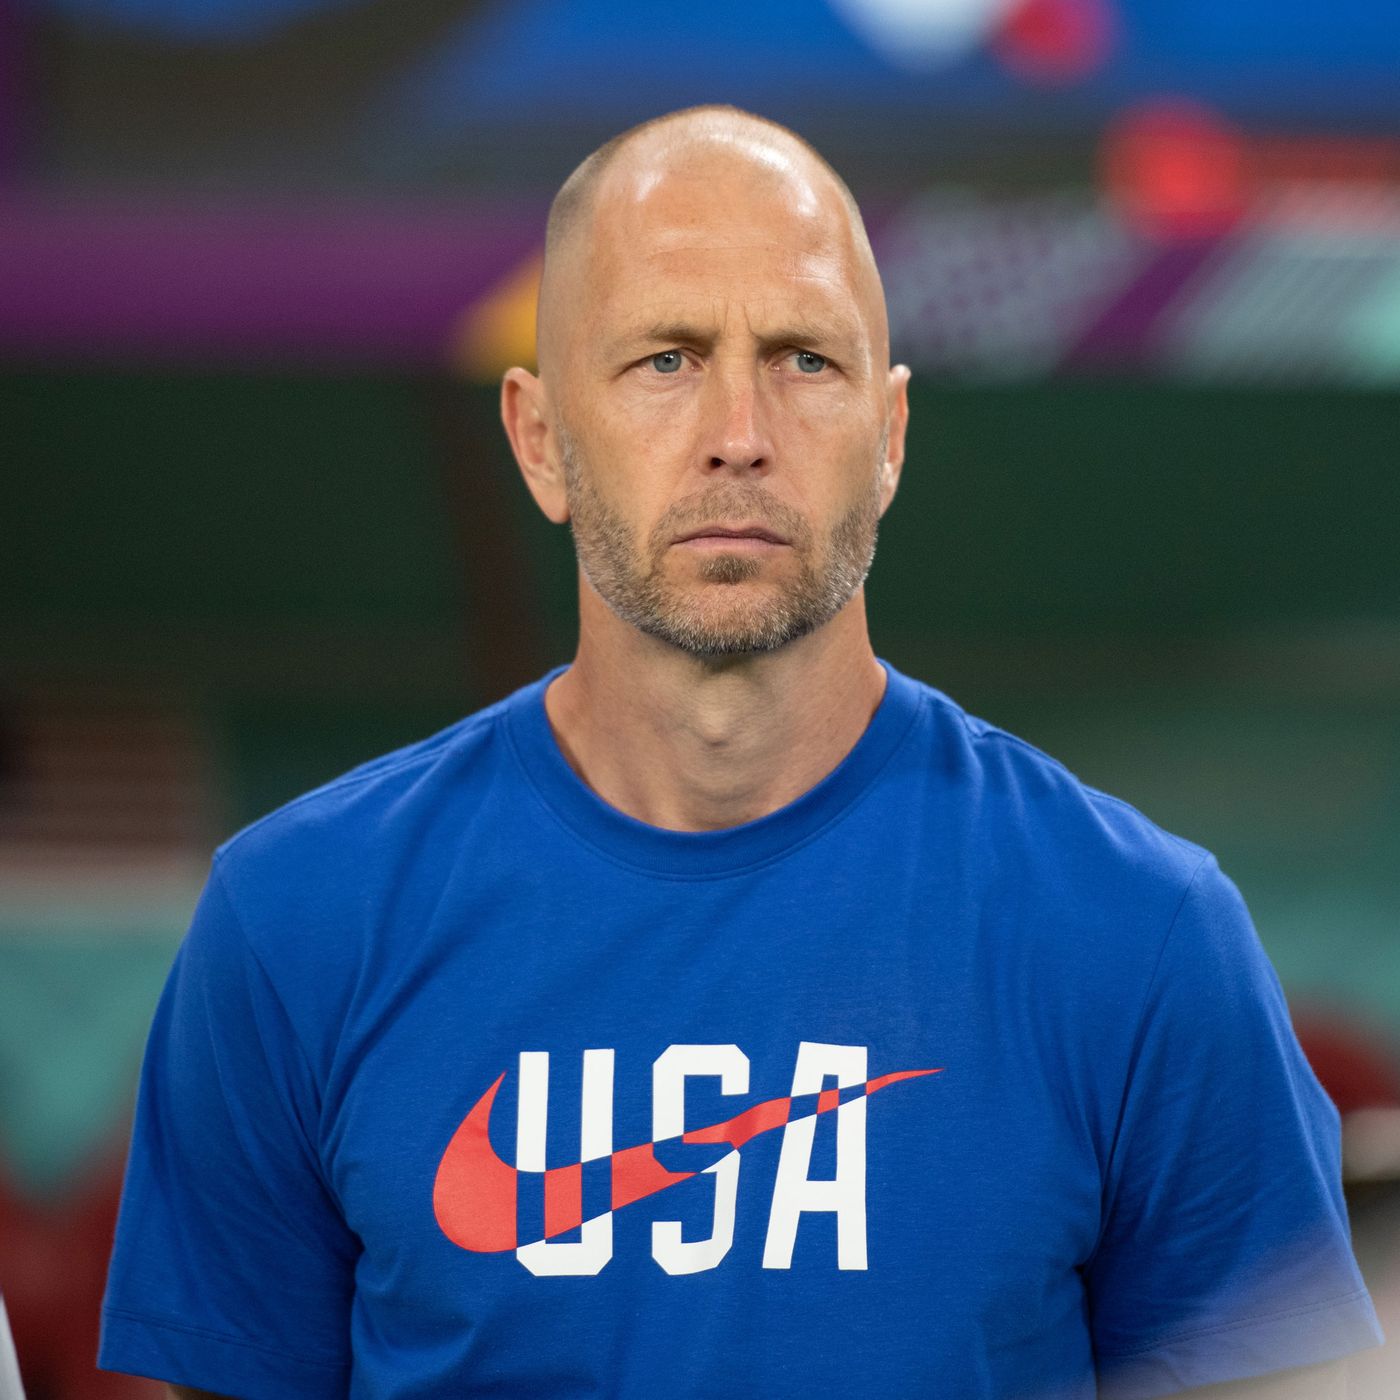 Claudio Reyna told U.S. Soccer about past Gregg Berhalter domestic